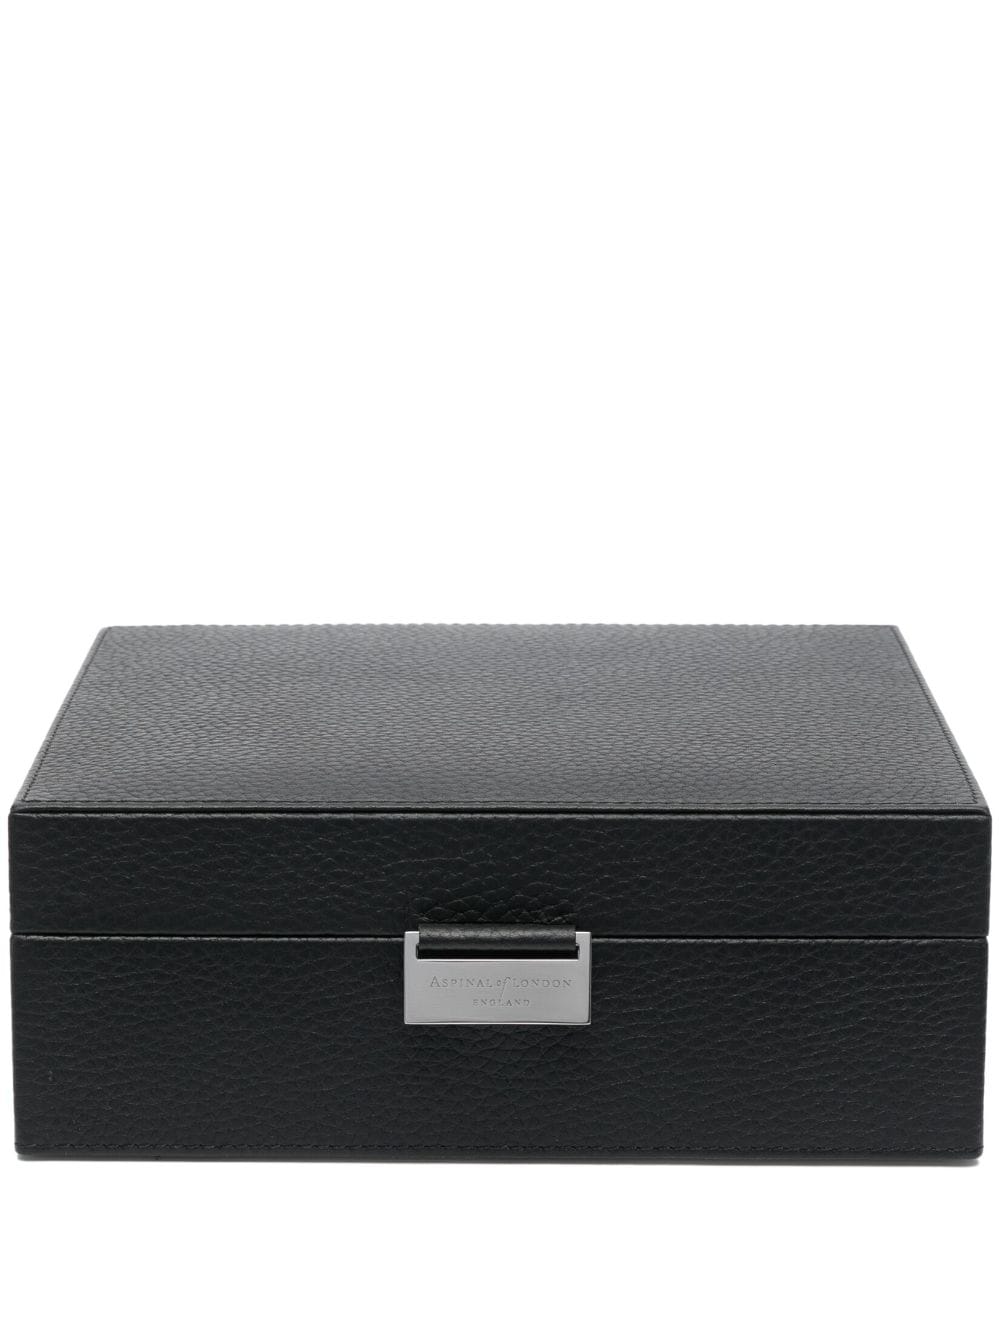 Aspinal Of London Reporter 4 Watch Box In Black